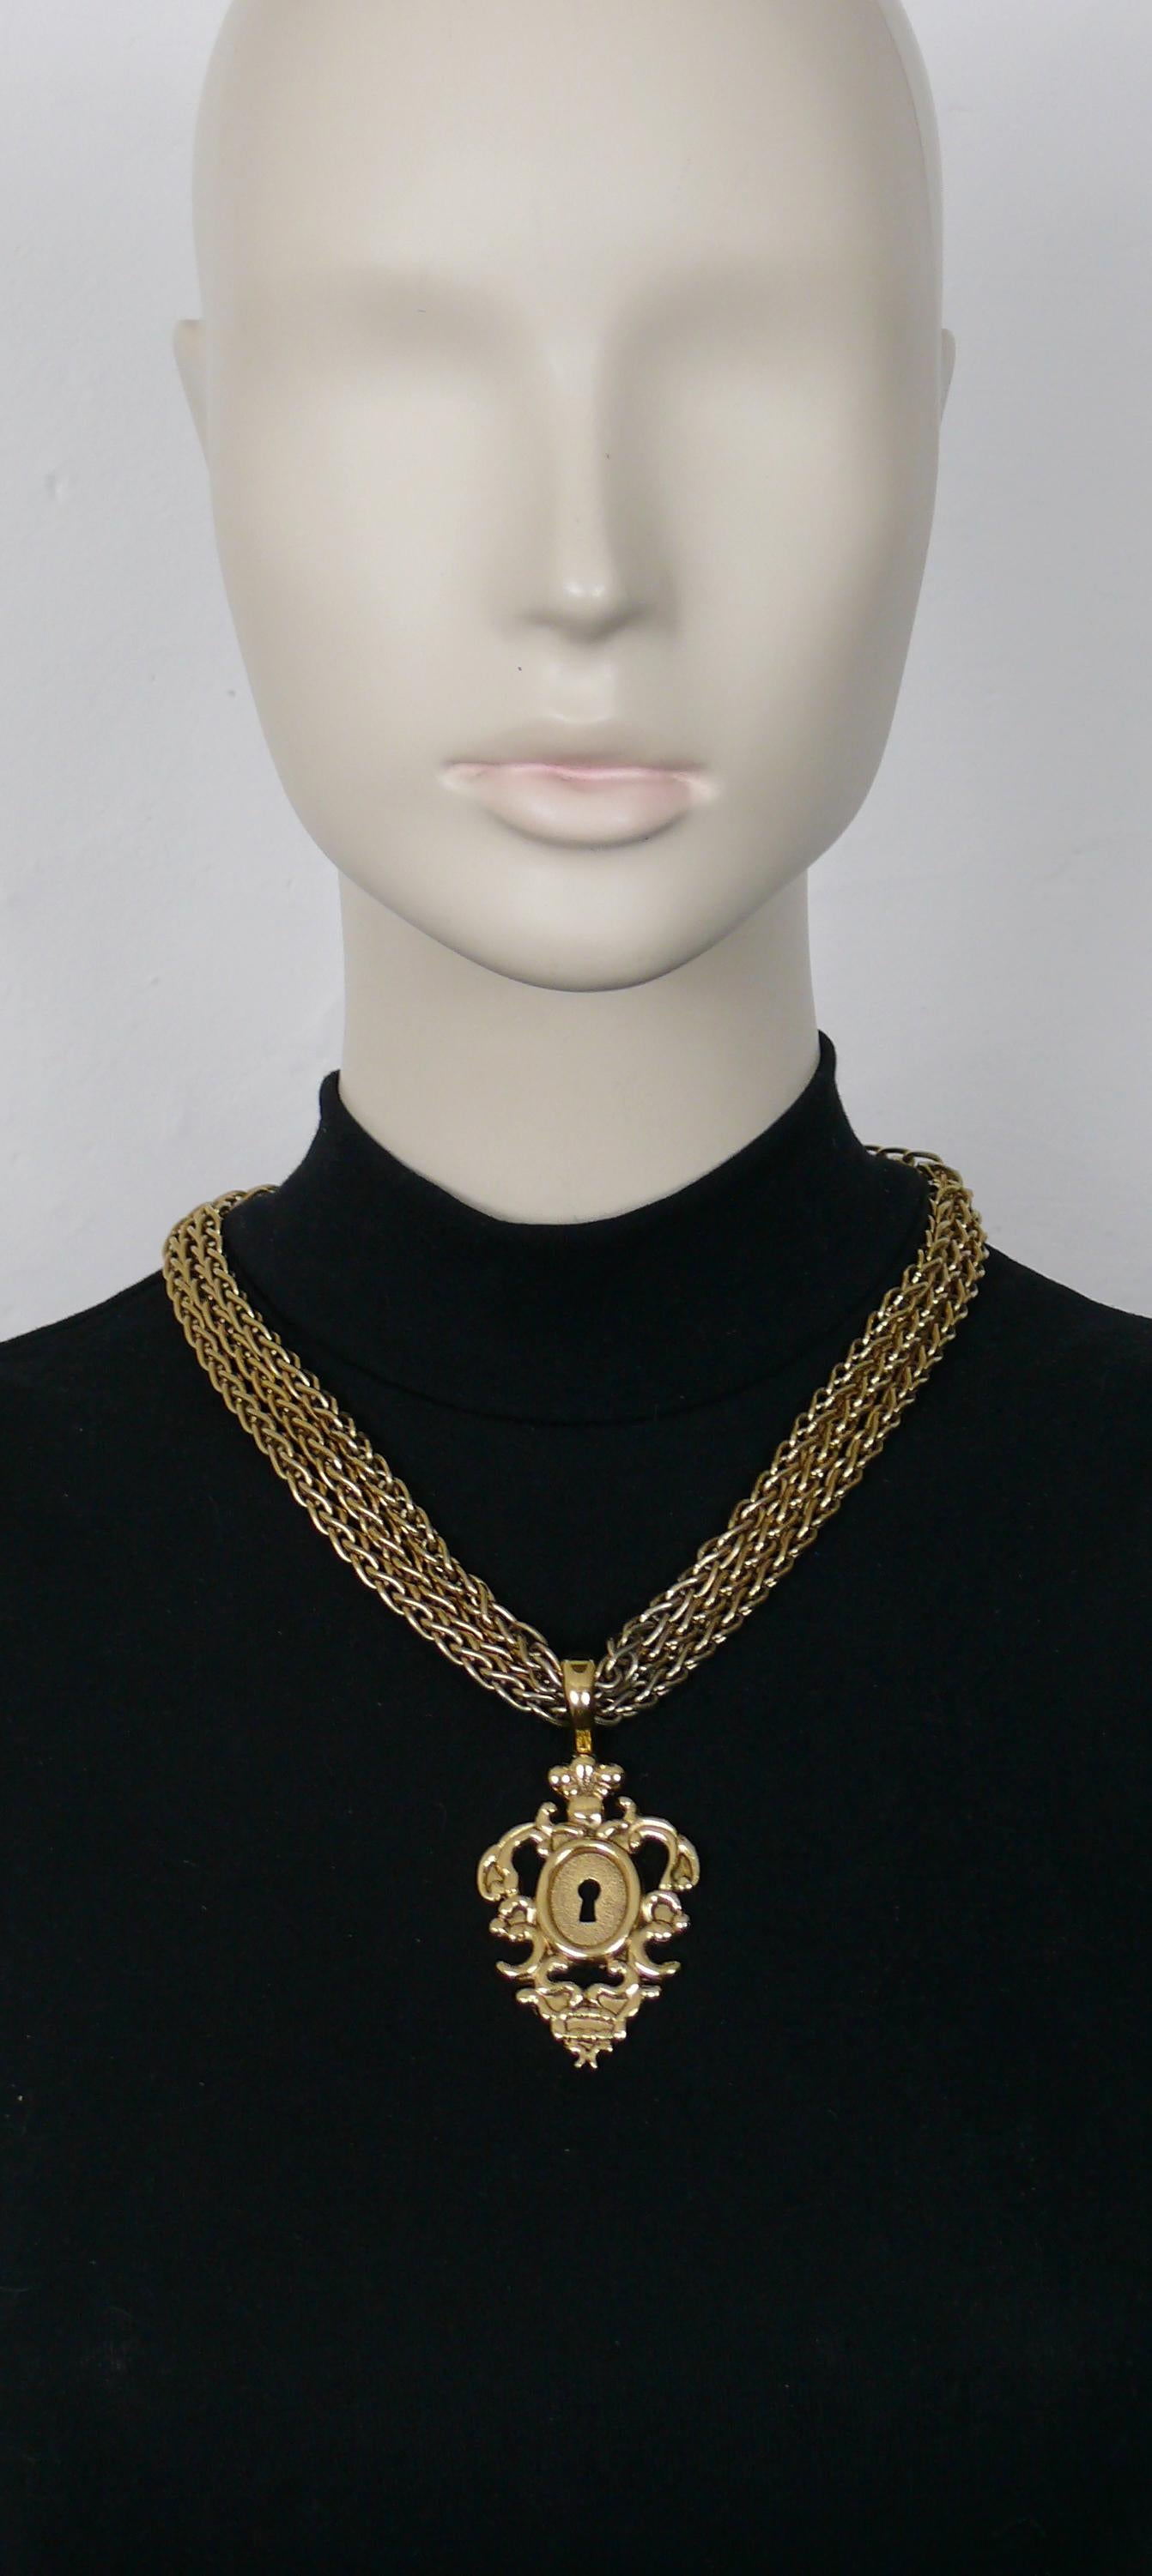 ROCHAS vintage gold toned triple chain necklace featuring an iconic Baroque lock design pendant.

Embossed ROCHAS 882 on the reverse of the lock.

T-bar an toggle closure.

Indicative measurements : wearable length approx. 52 cm (20.47 inches) /